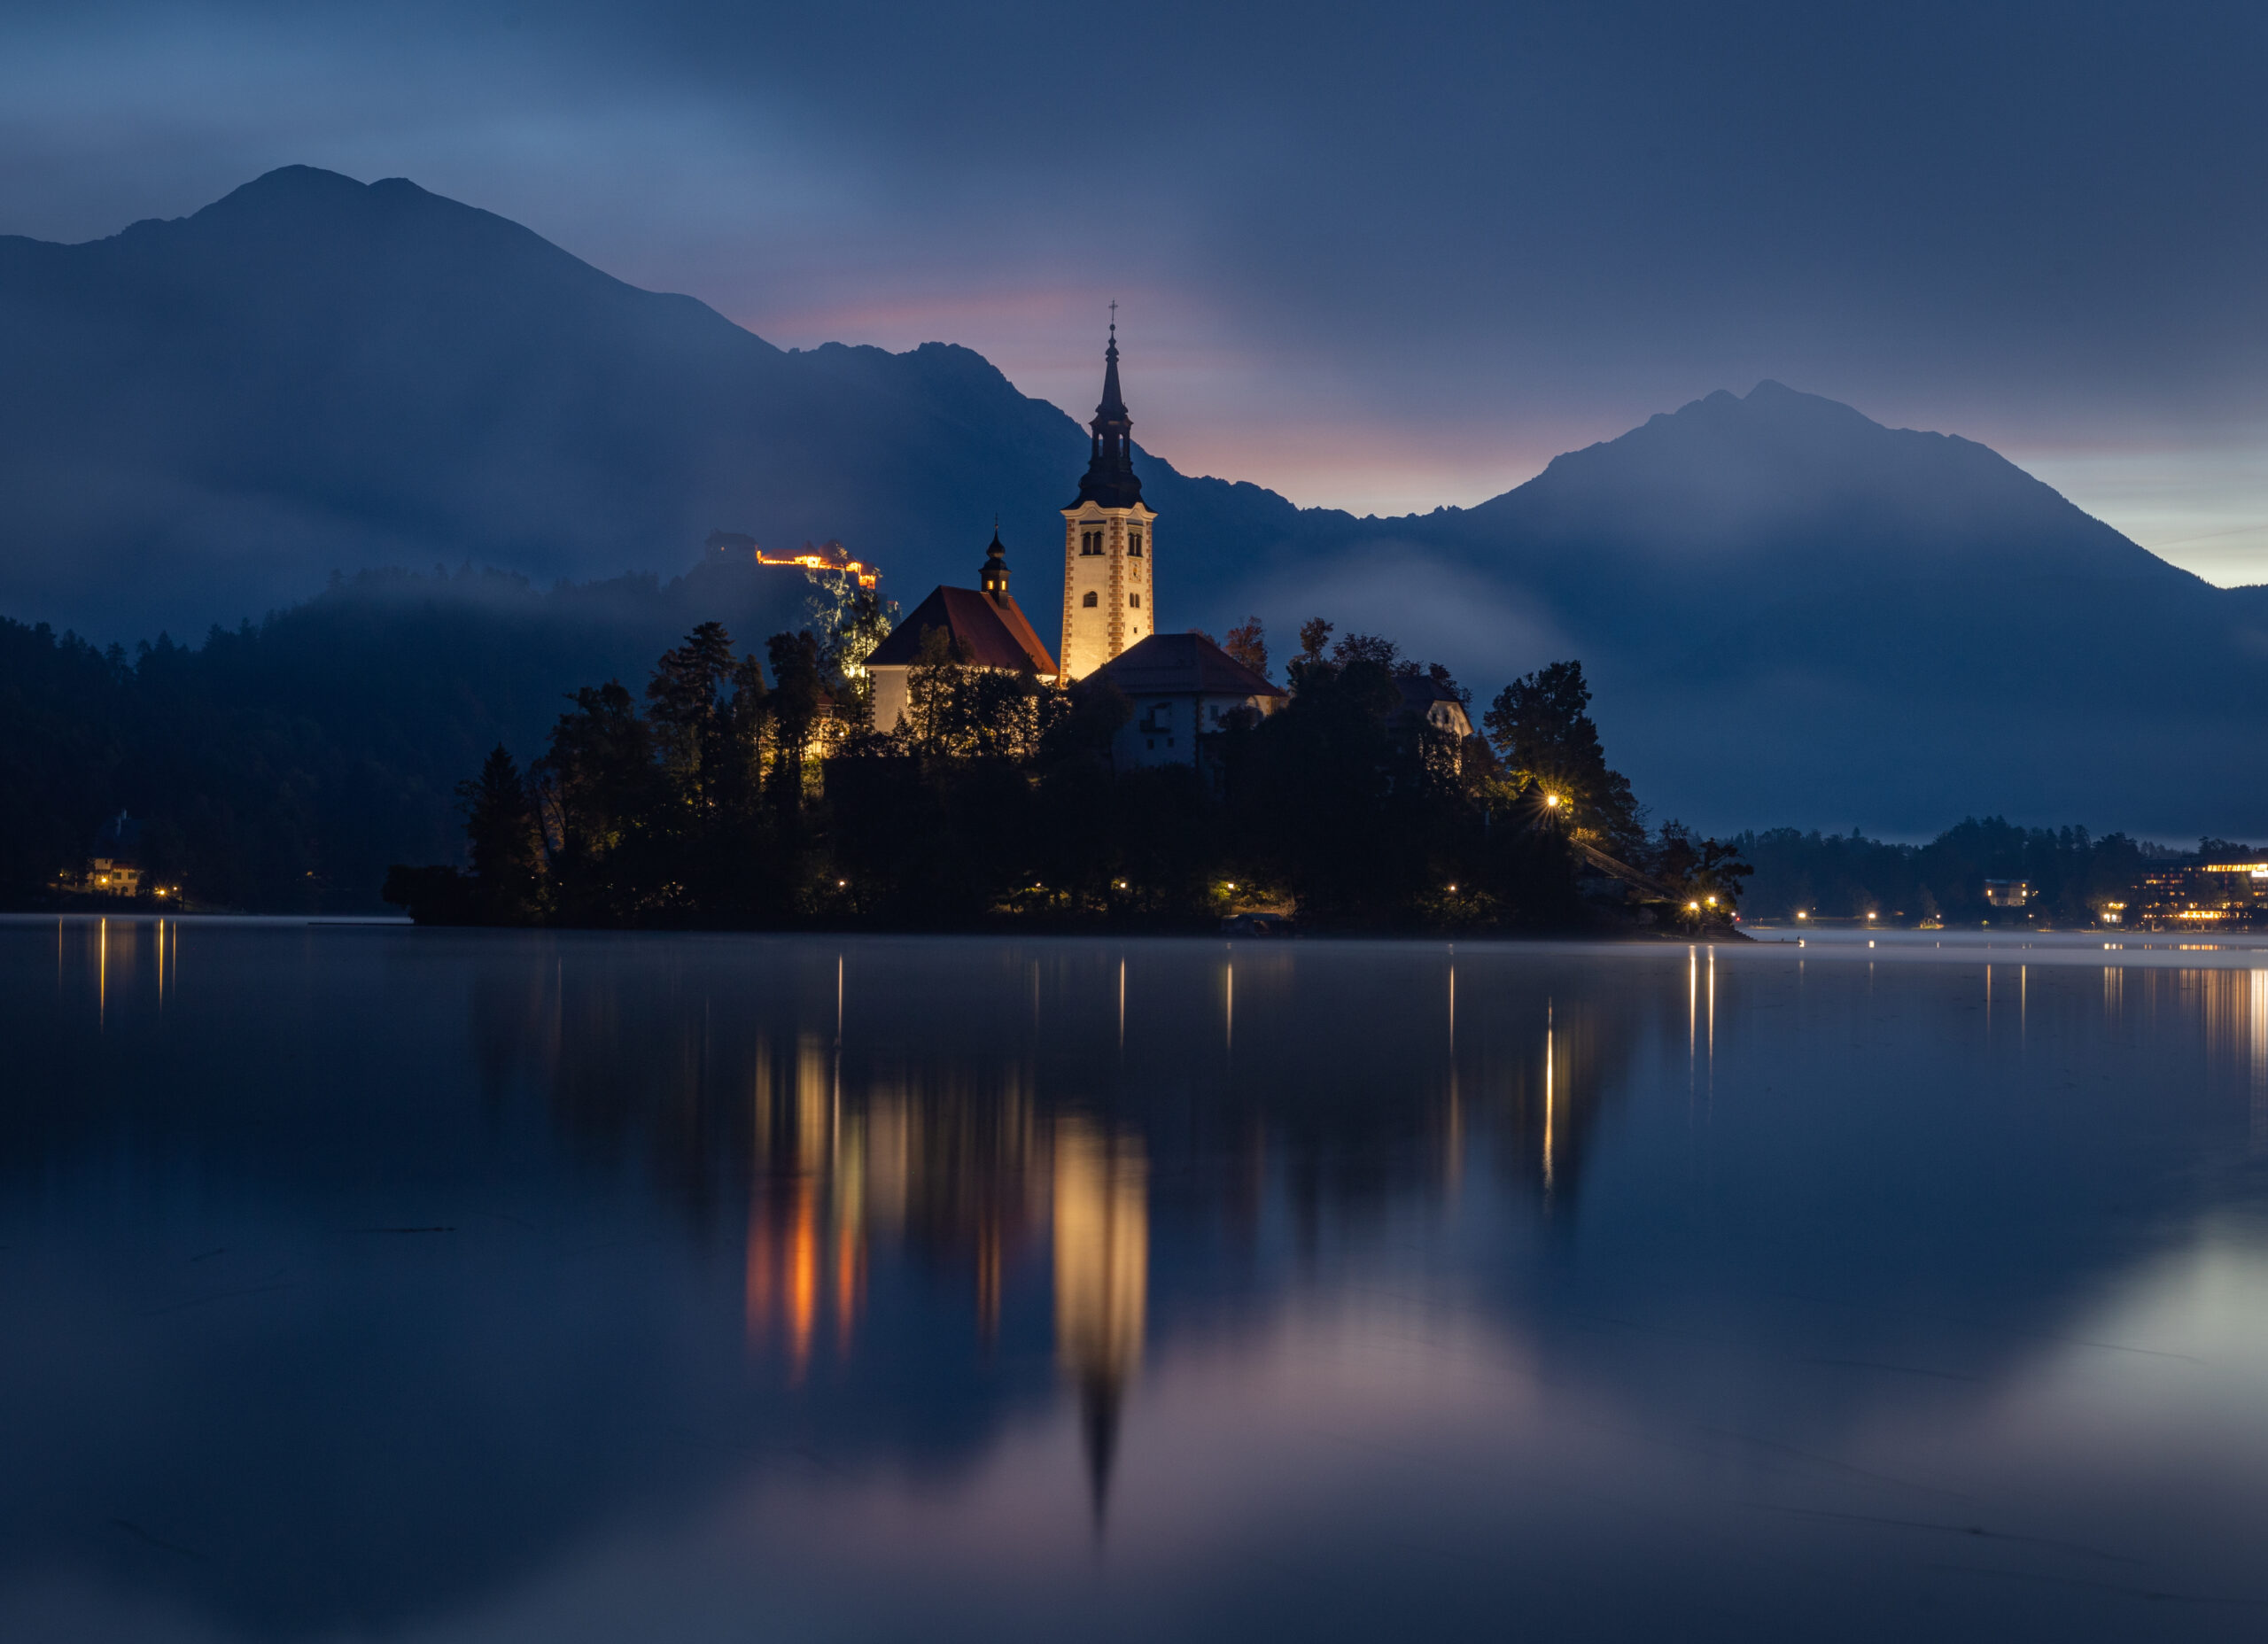 Town on a lake with alps in background. Lovely evening mirror reflection in lake.